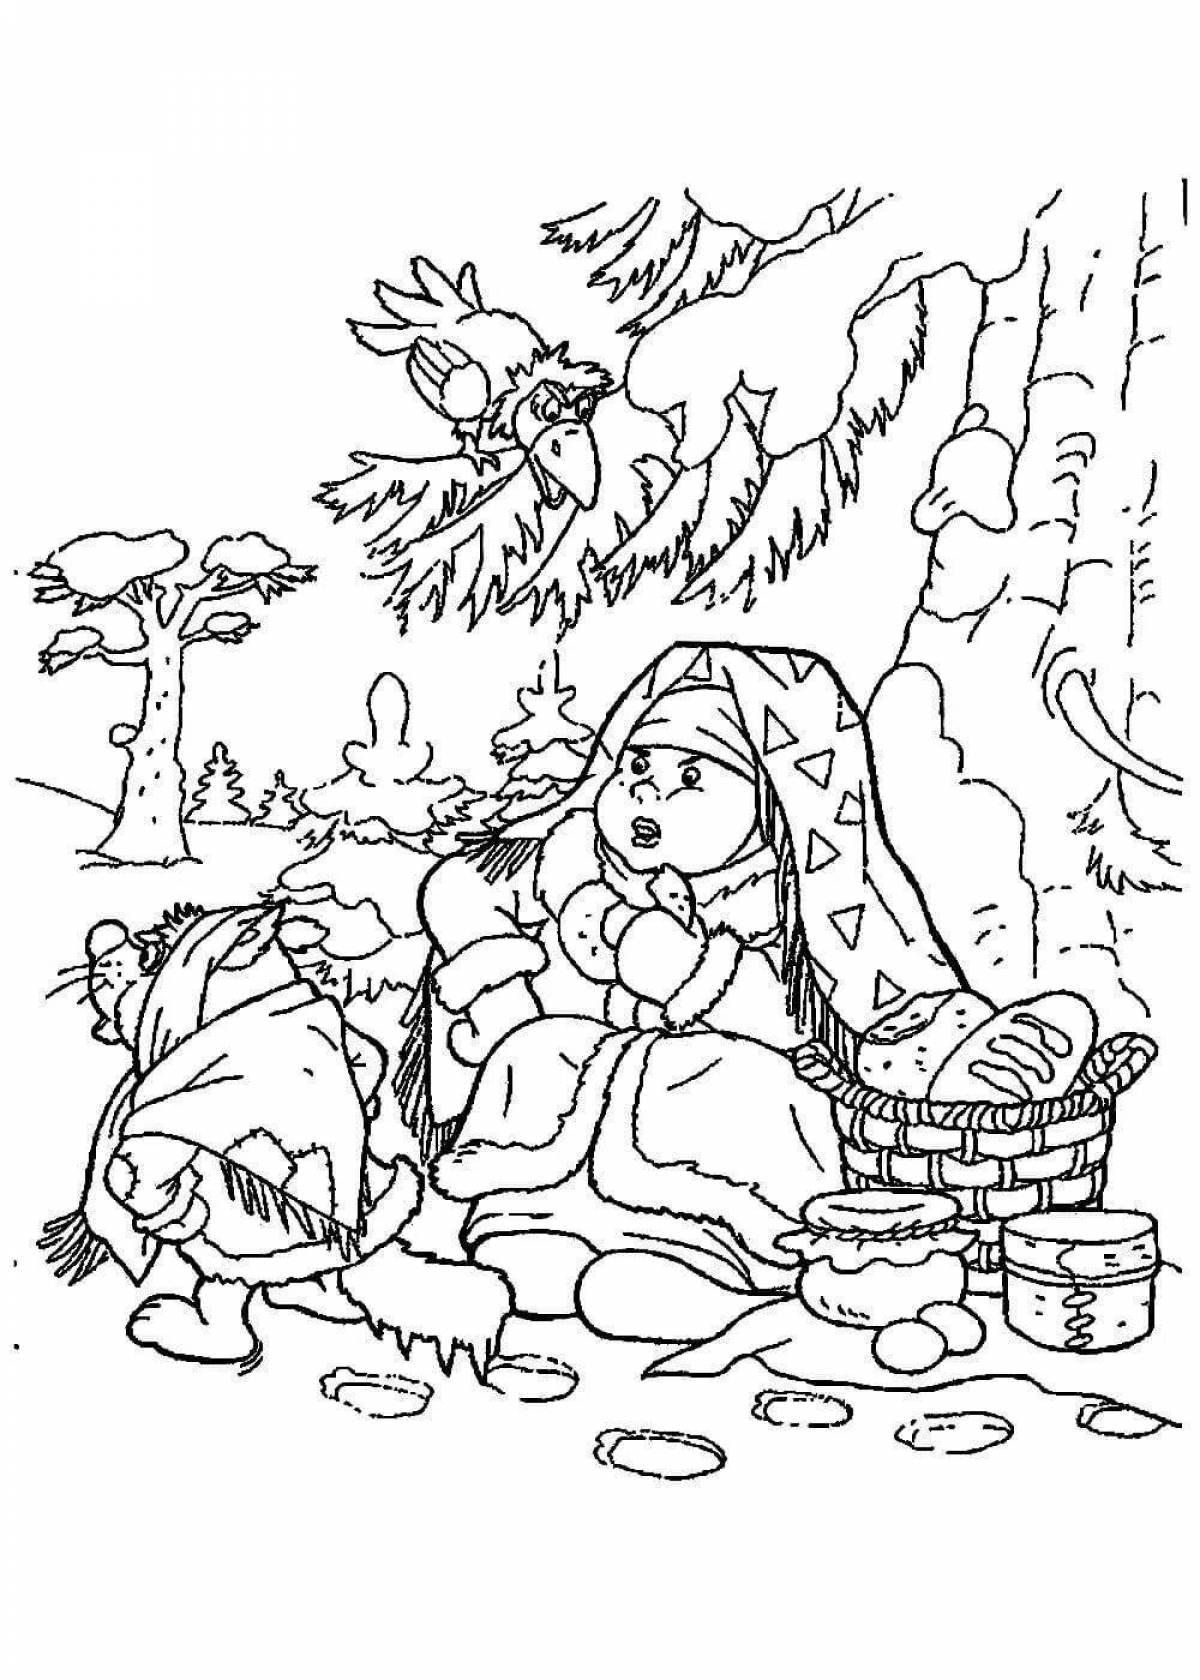 Peaceful coloring Moroz Ivanovich needlewoman and sloth